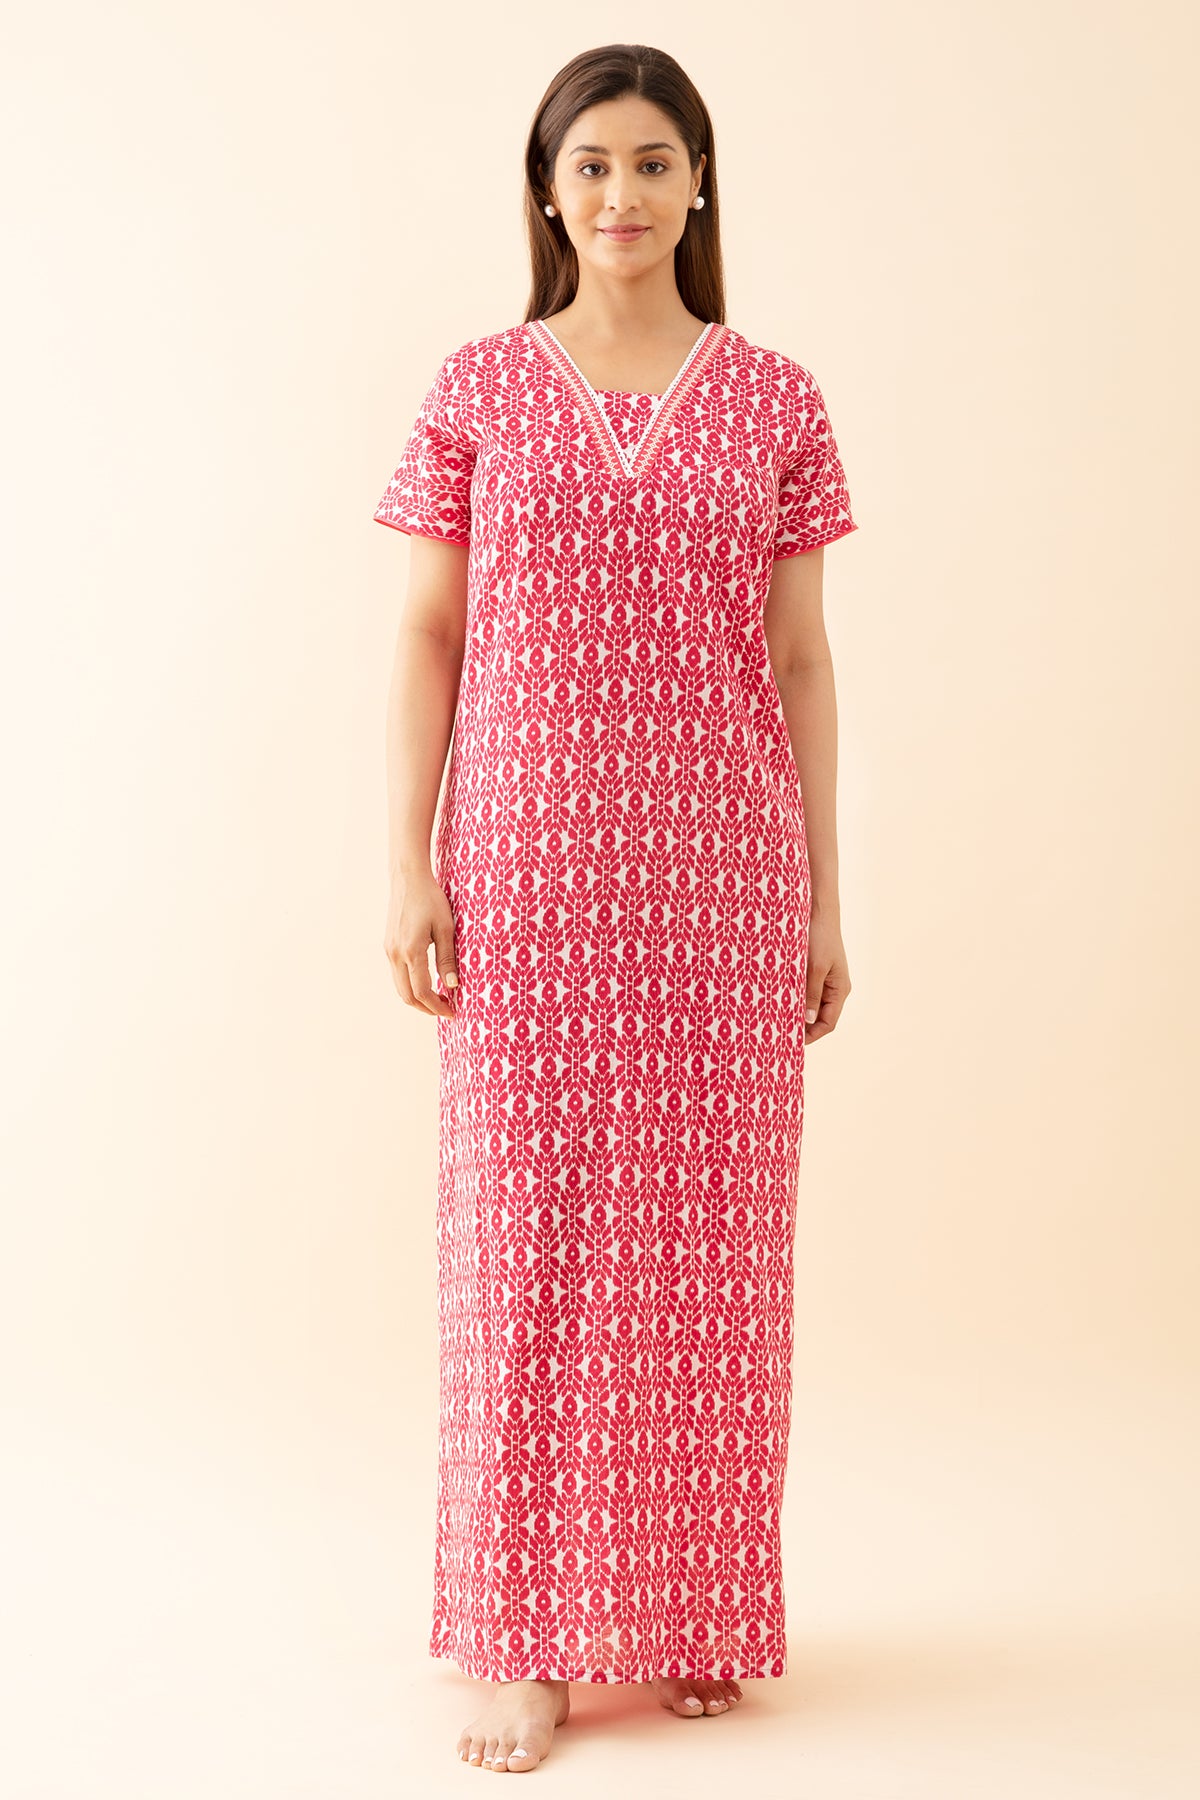 Geometric Printed Nighty with Lace Embellished Neckline - Pink